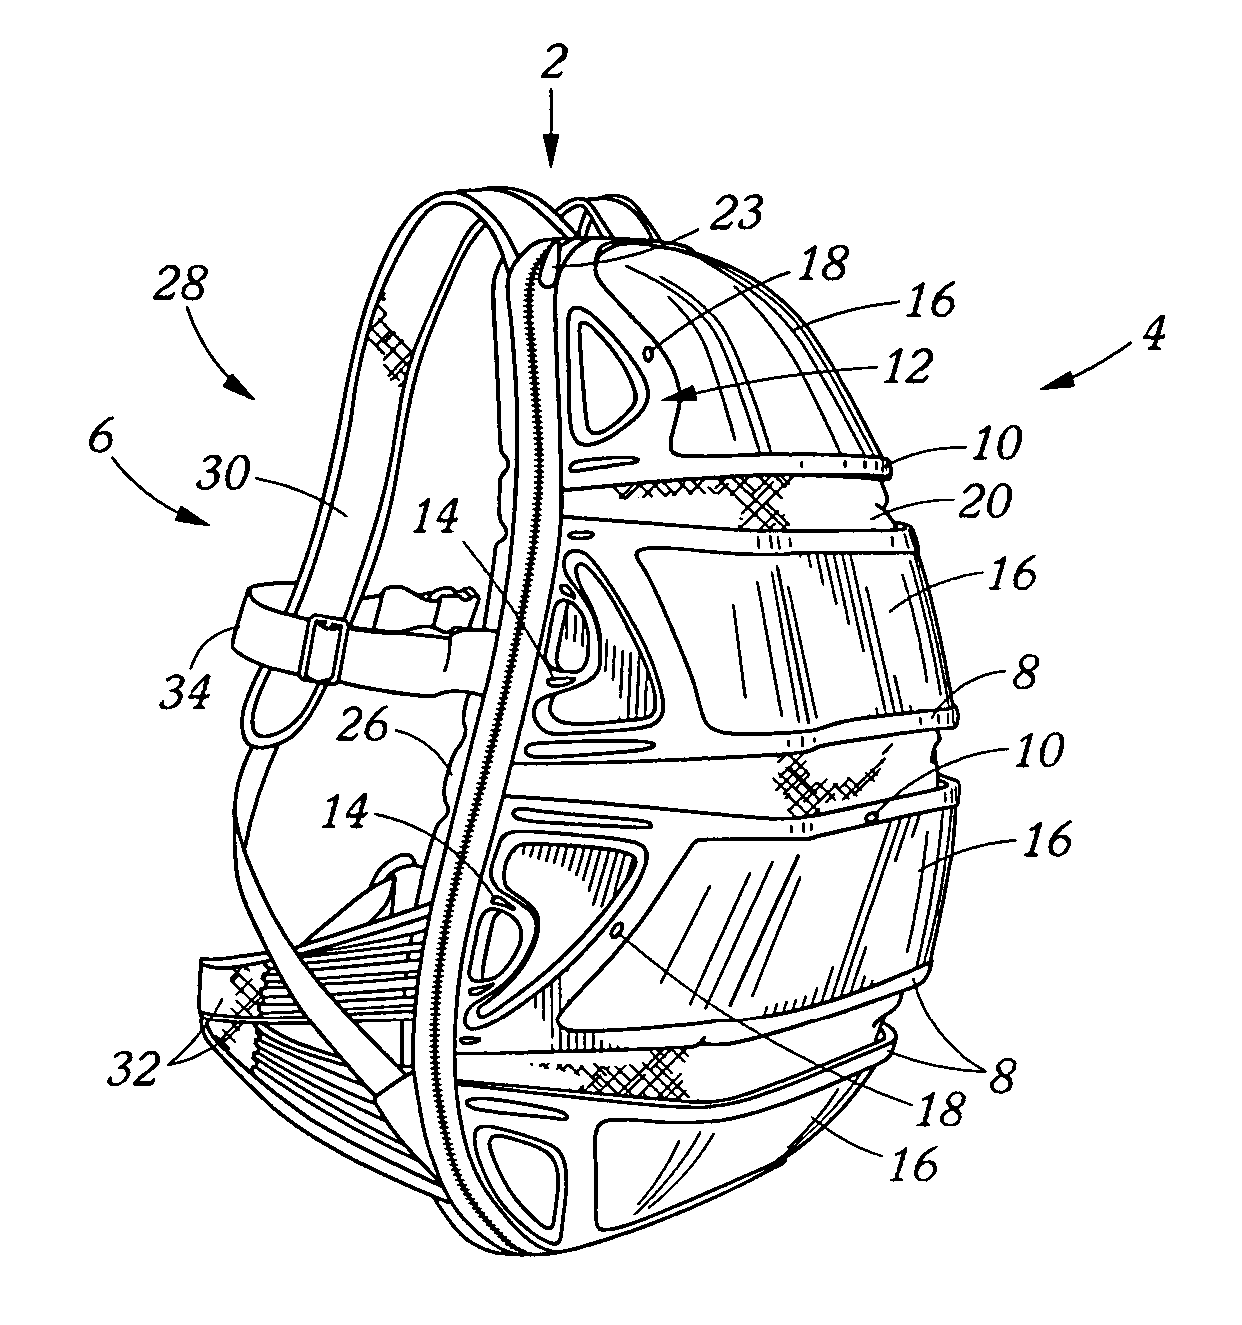 Backpack with segmented construction body protecting features